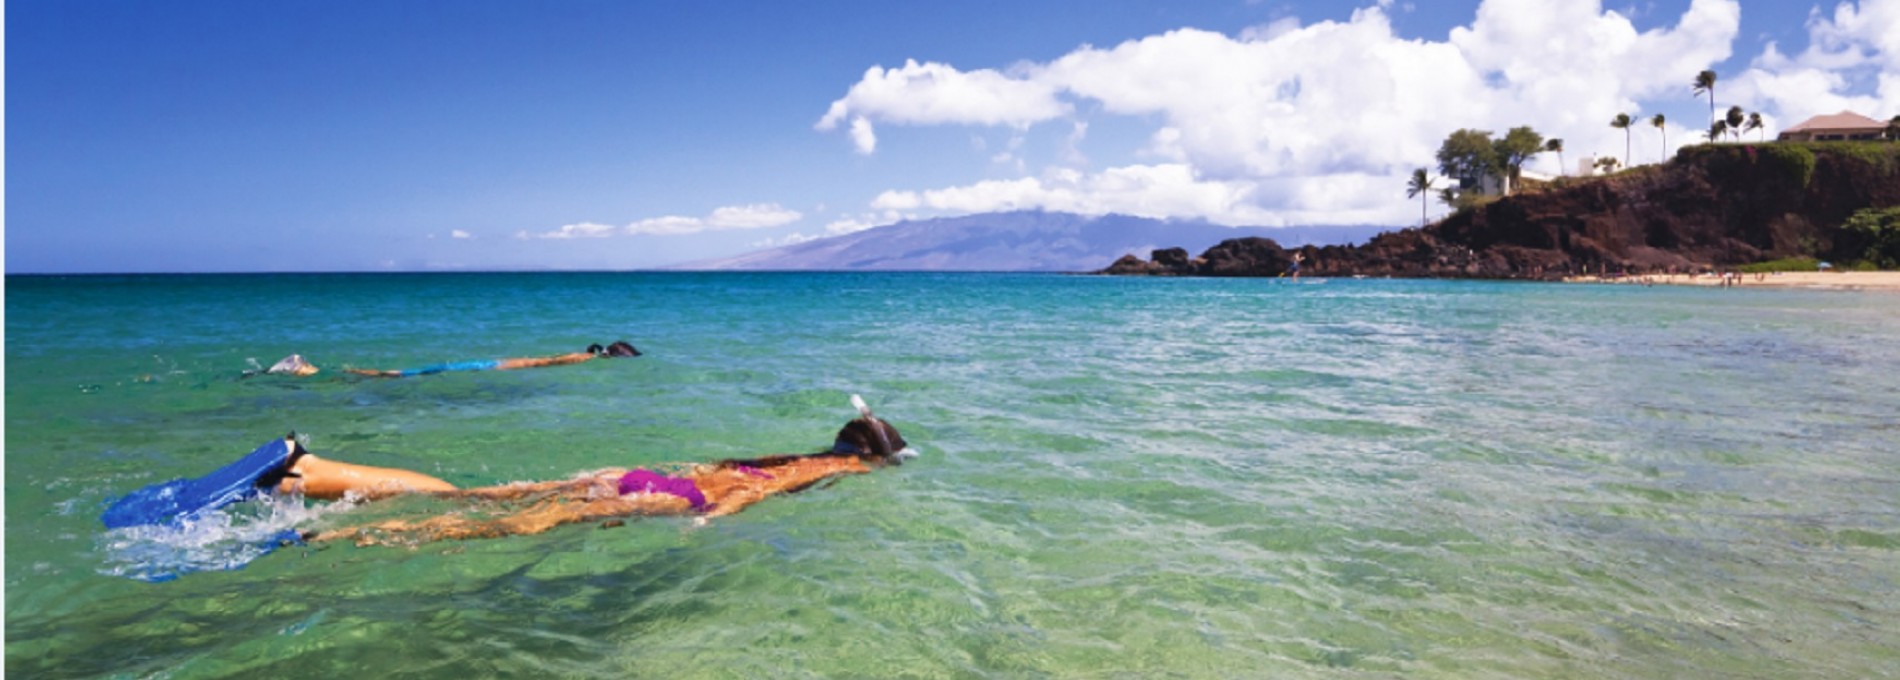 Snorkel on Maui The Best Activity and Least Expensive